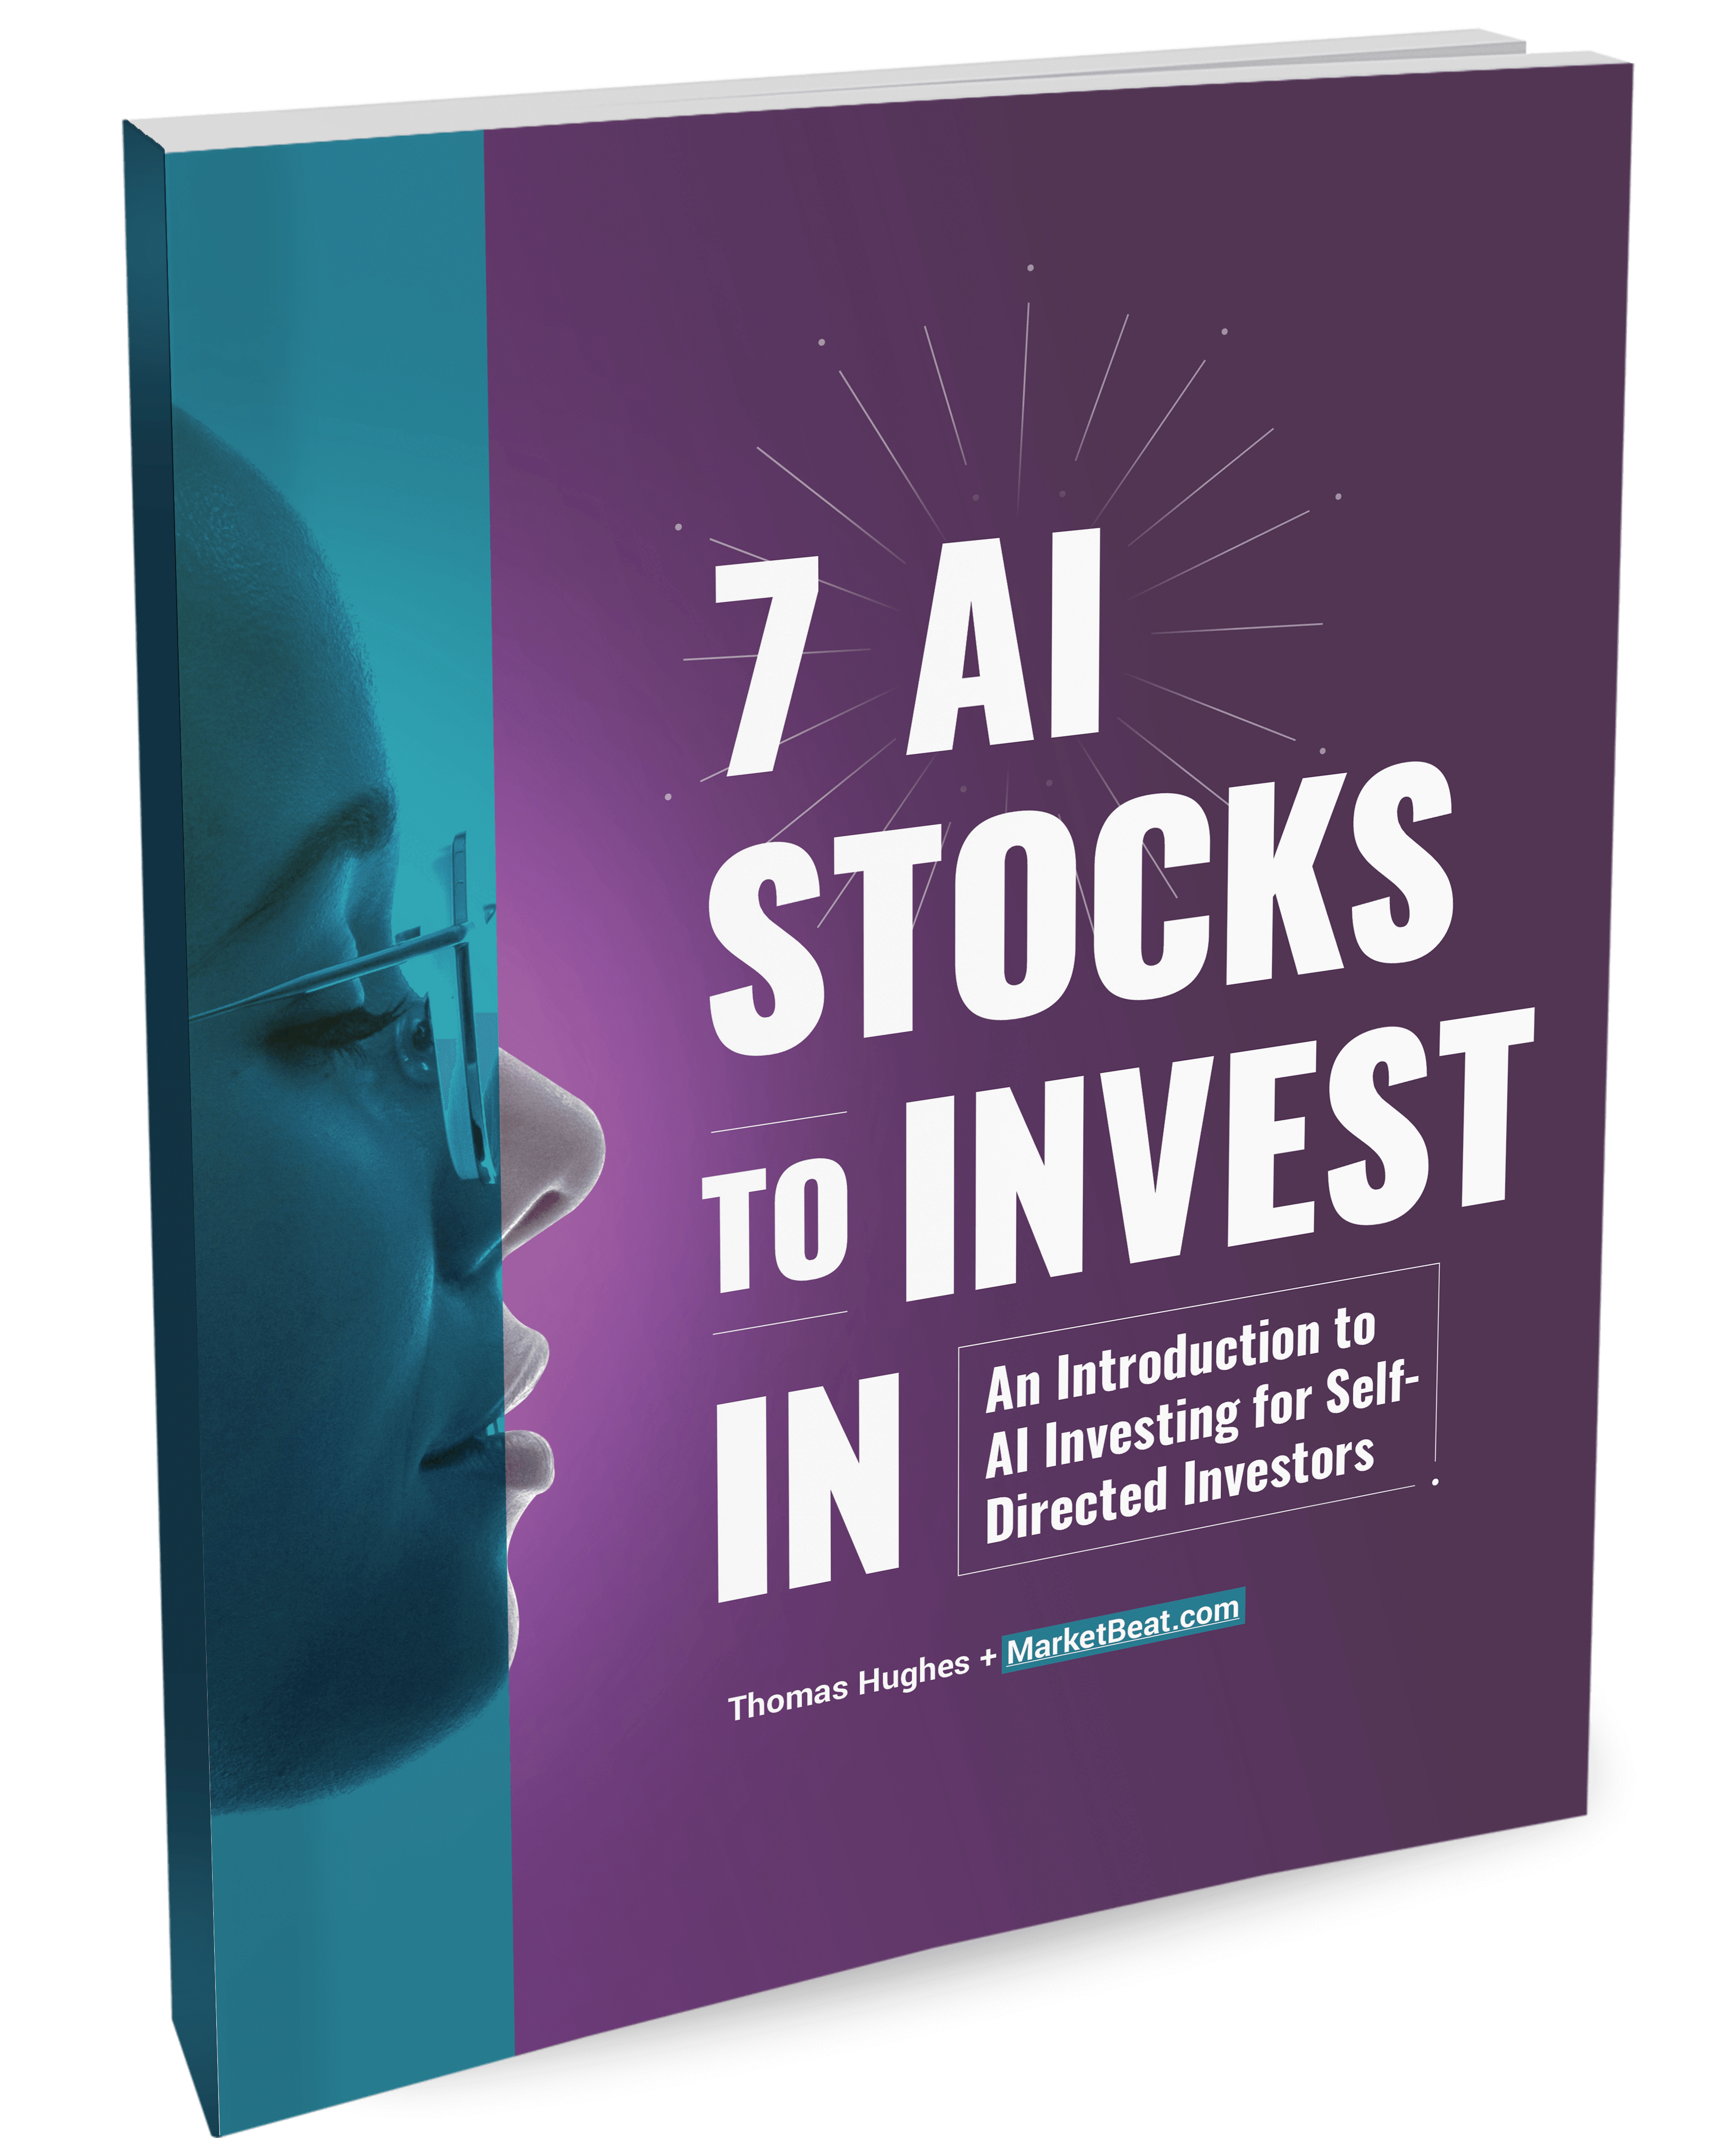 7 AI Stocks to Invest In: An Introduction to AI Investing For Self-Directed Investors cover image